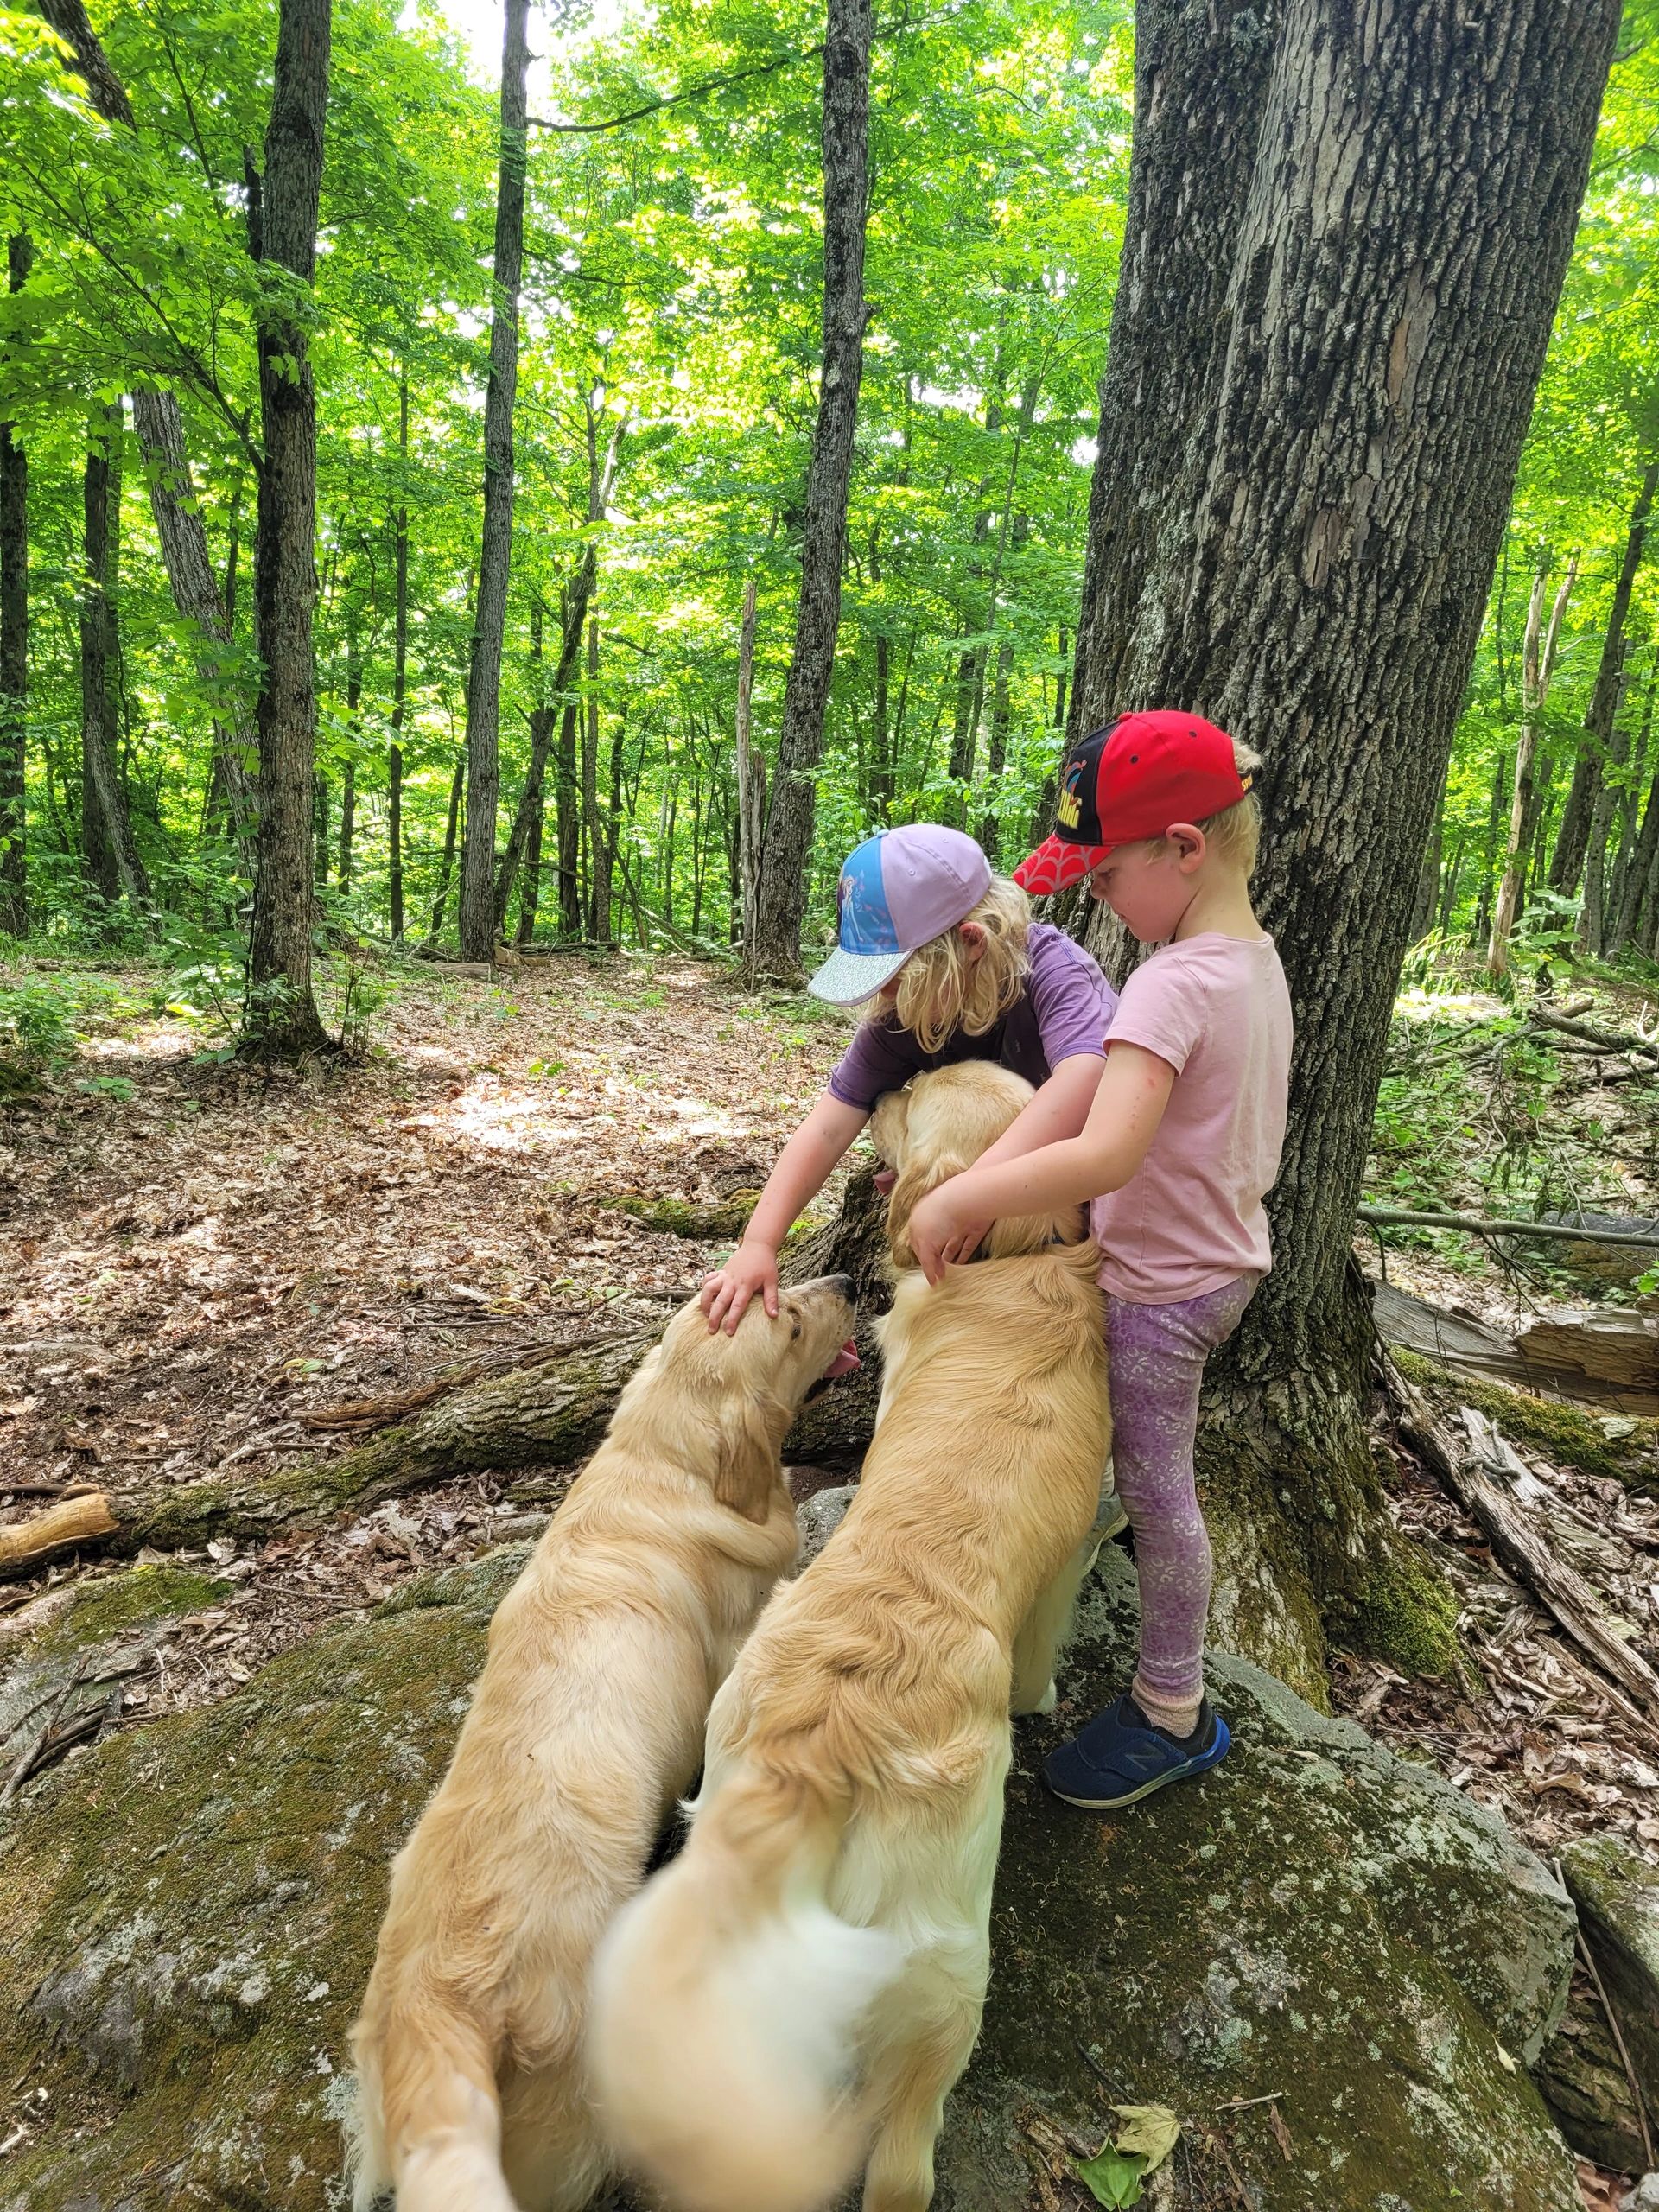 Two children petting two golden retrievers in a forest setting